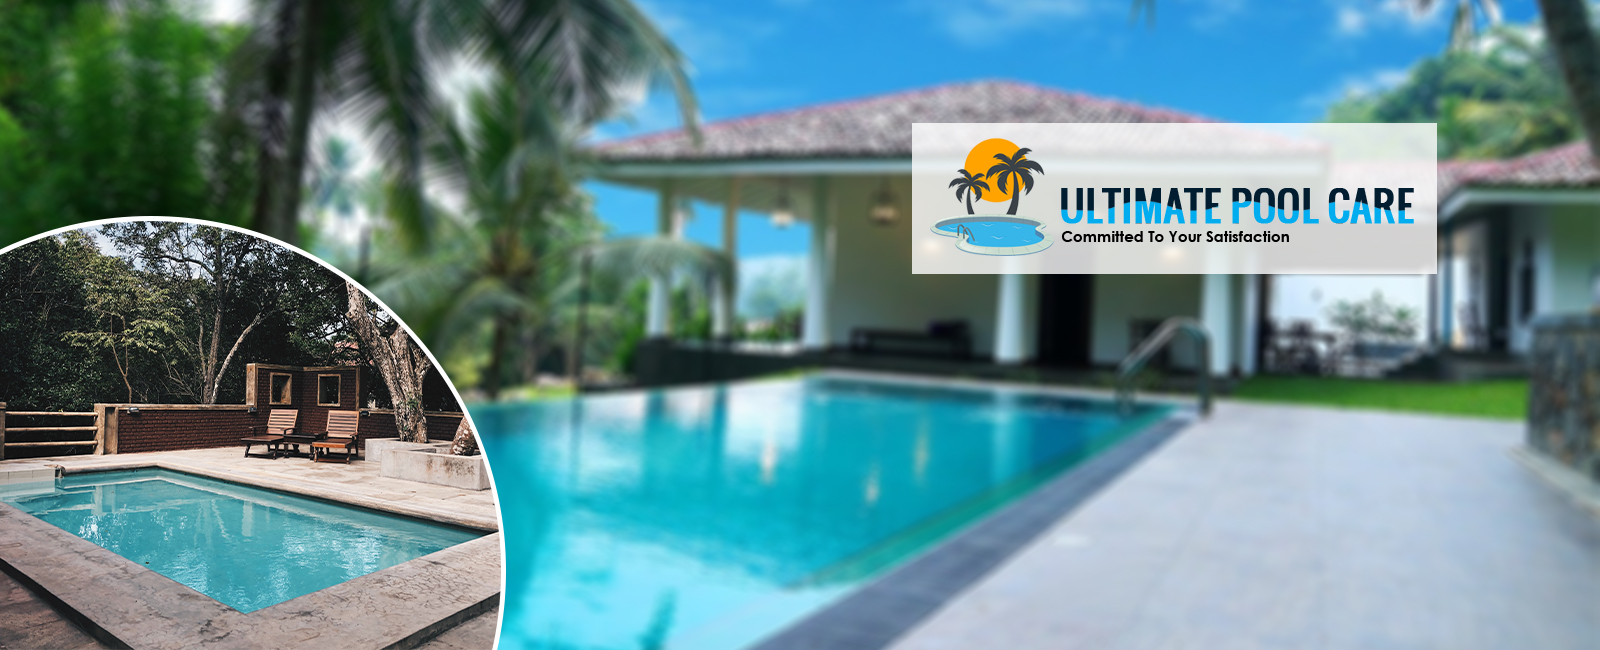 outdoor-inground-residential-pool-services